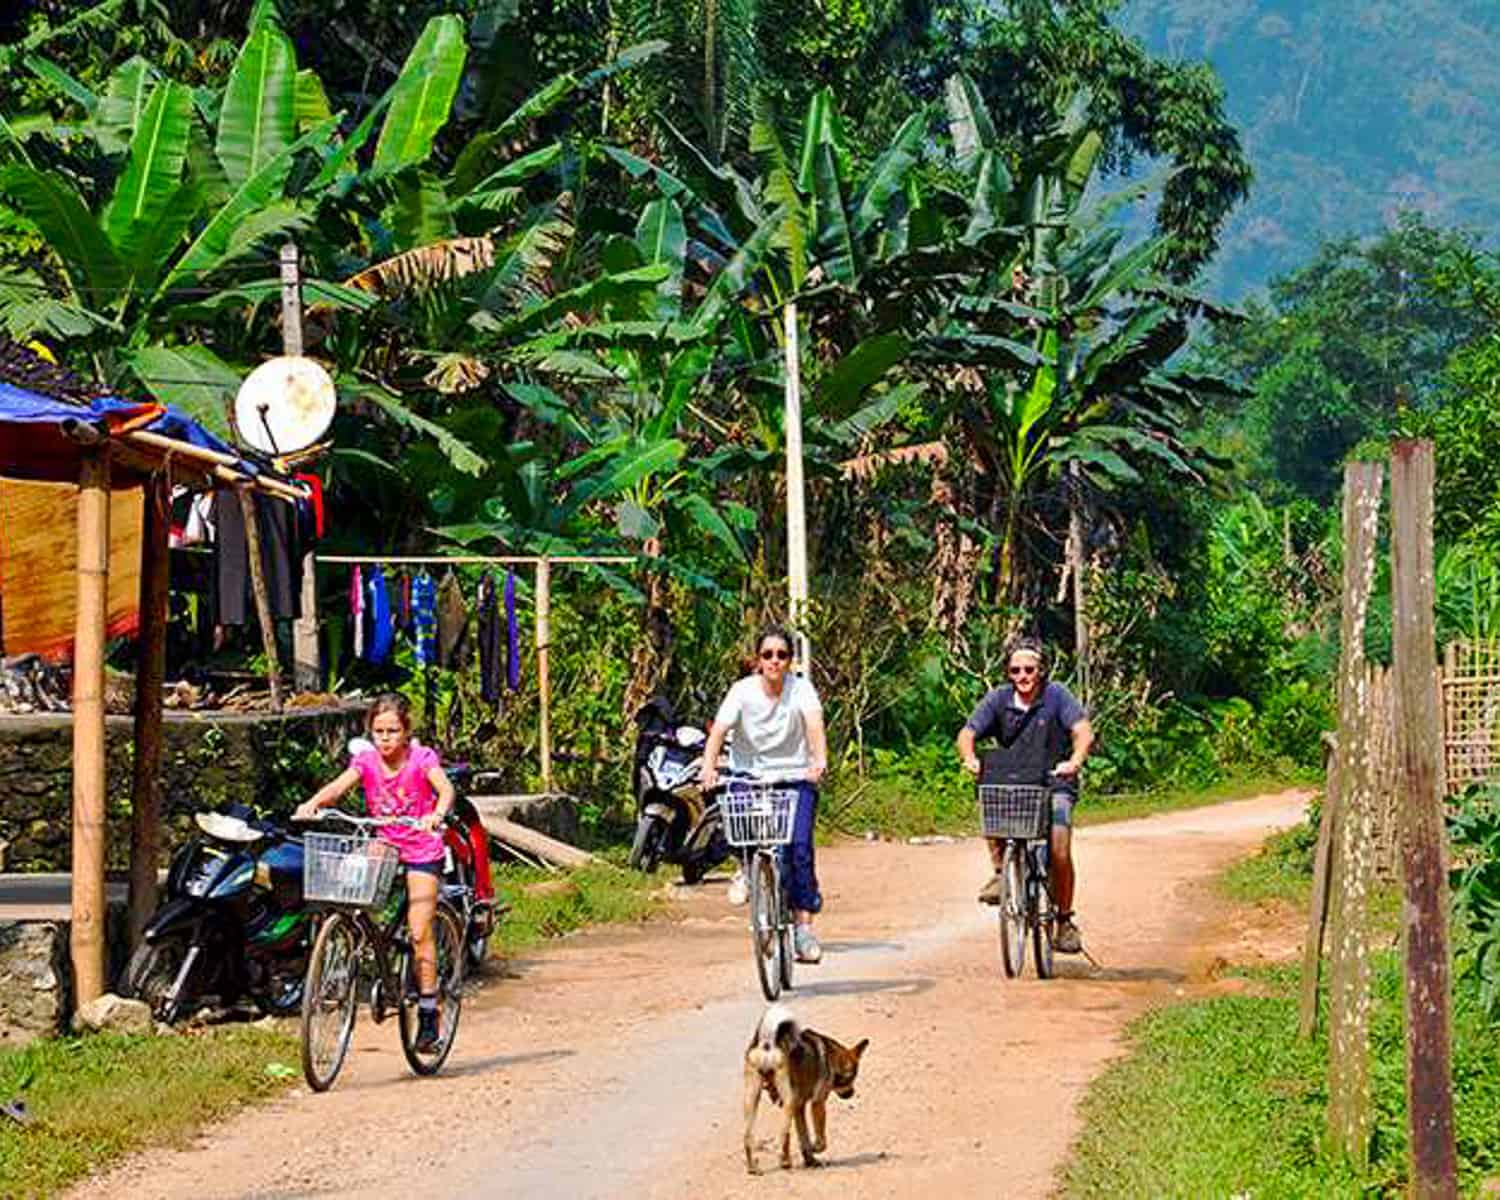 Take a deep breath and relax, Enjoy the tranquil beauty of Mai Chau Valley at your own pace